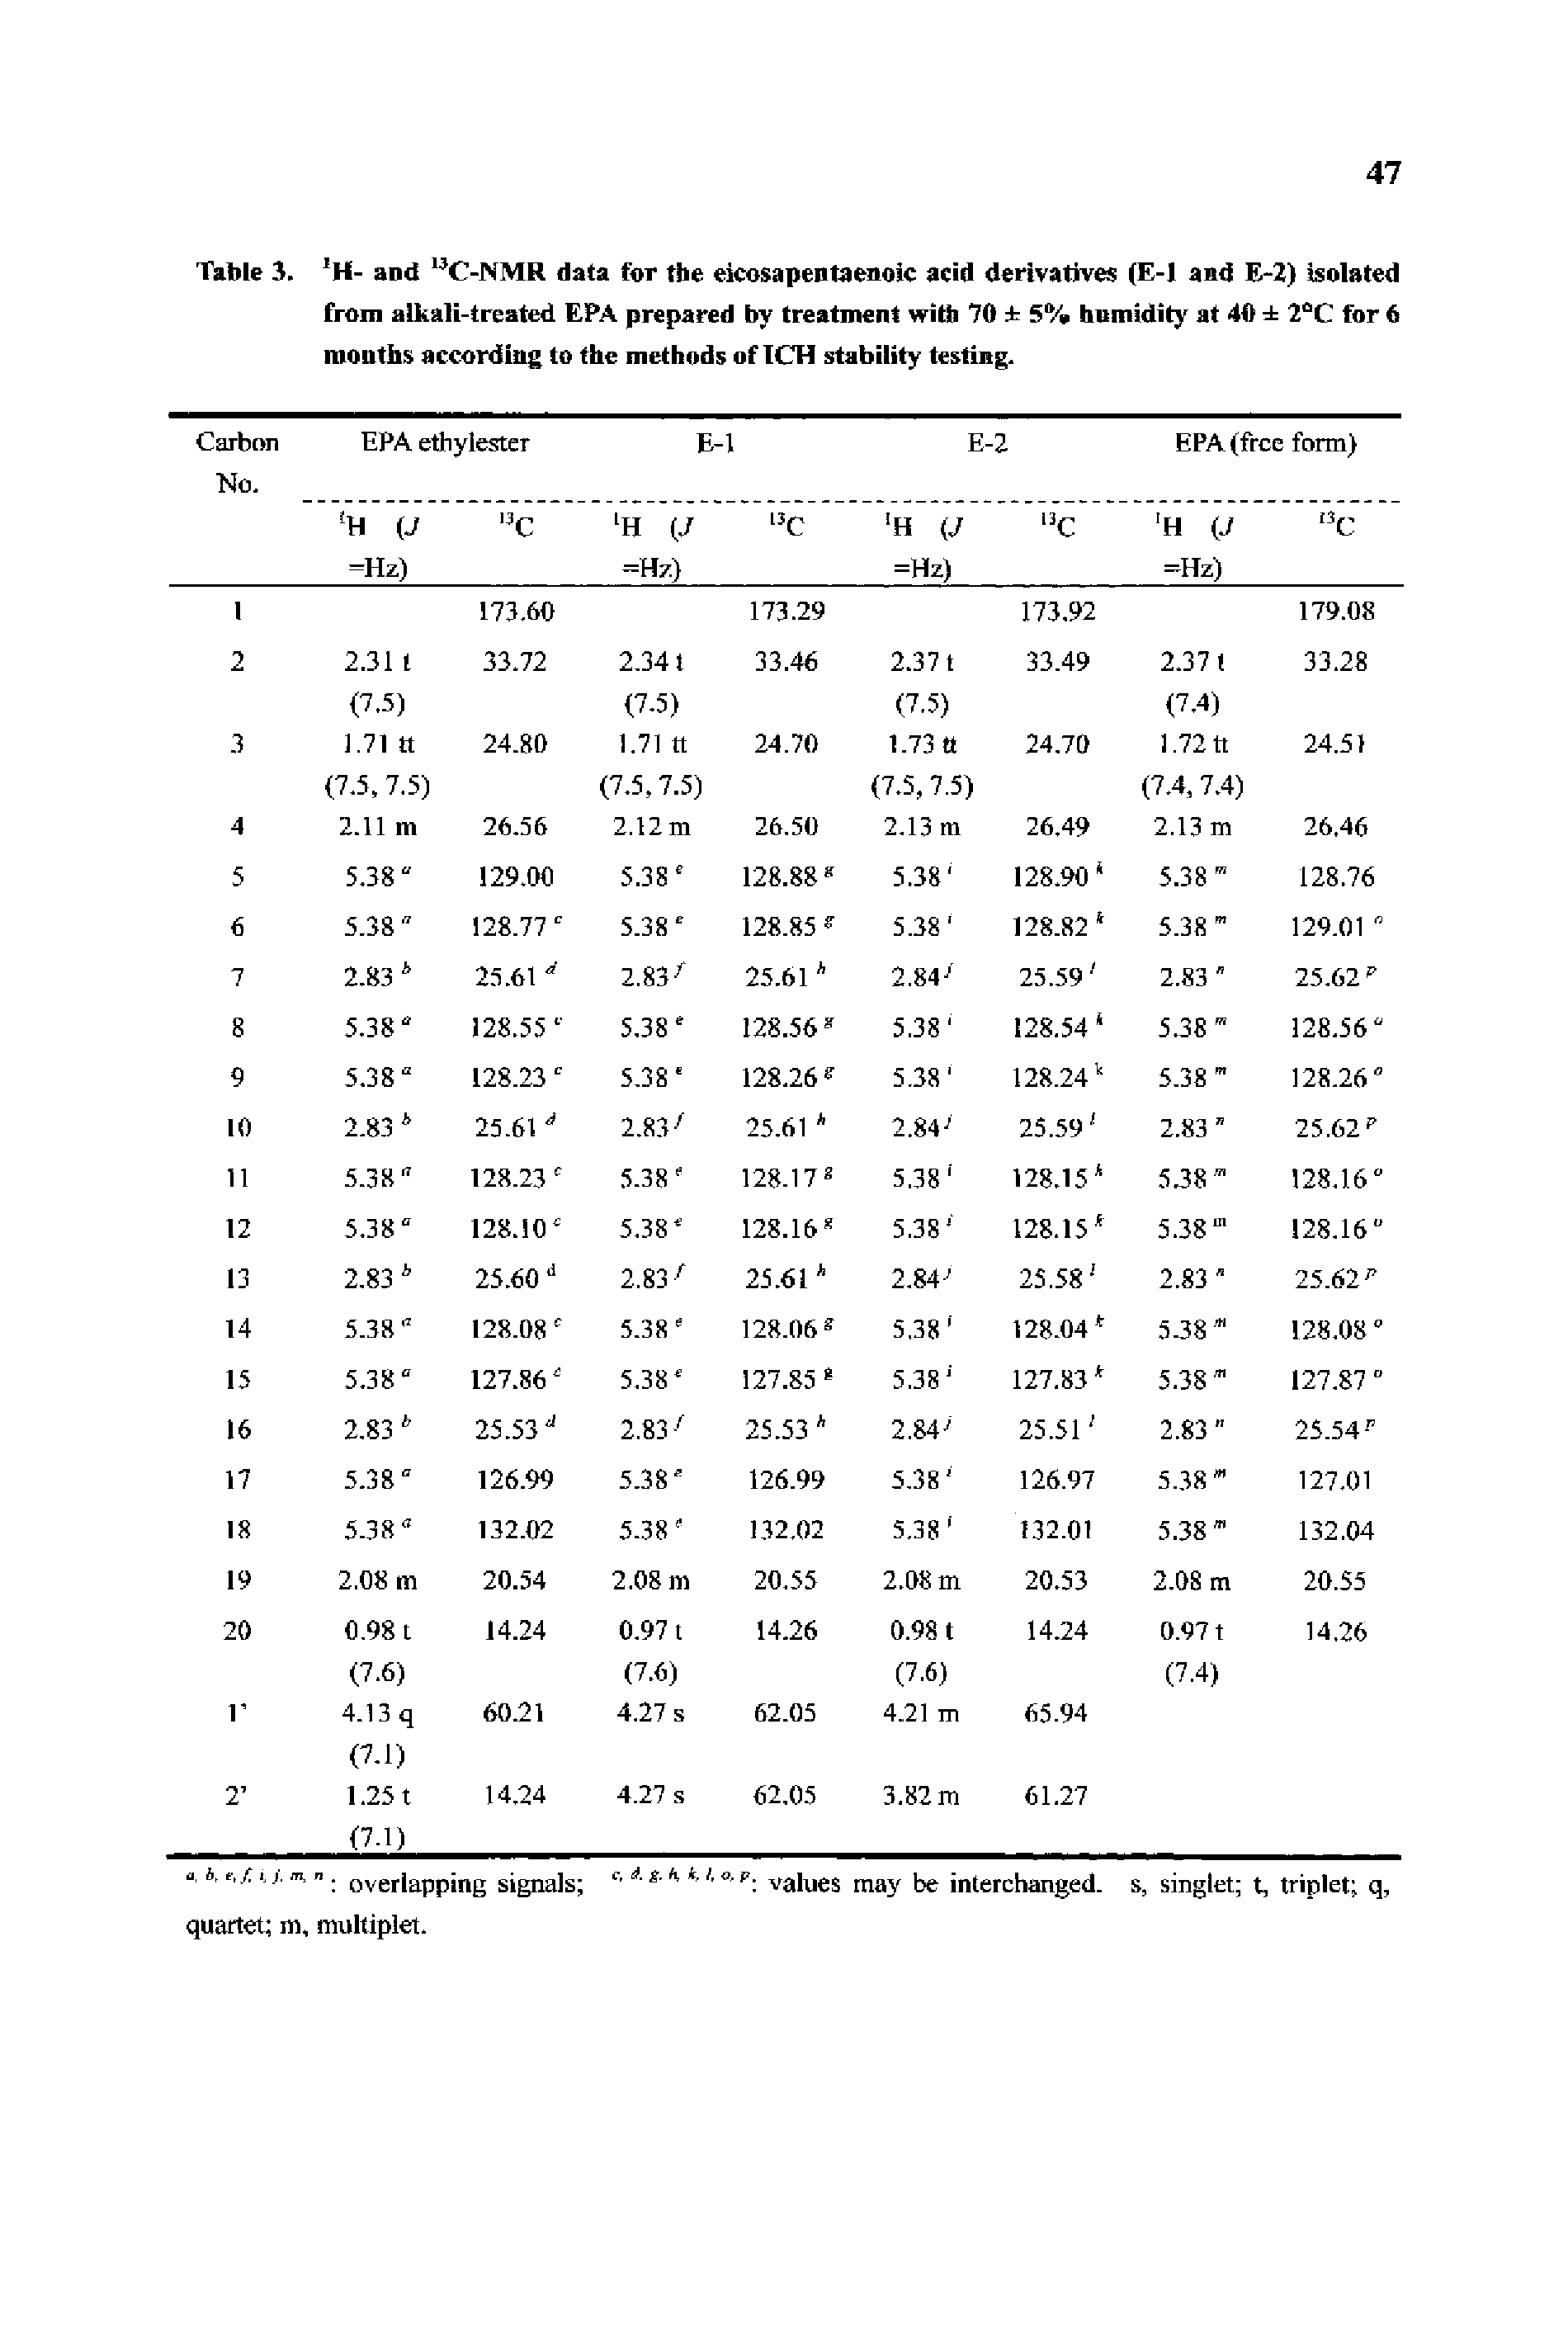 Table 3. M- and C-NMR data for the eicosapentaenoic acid derivatives (E-1 and E-2) isolated from alkali-treated EPA prepared by treatment with 70 i 5% humidity at 40 2 C for 6 months according to the methods of ICH stability testing.